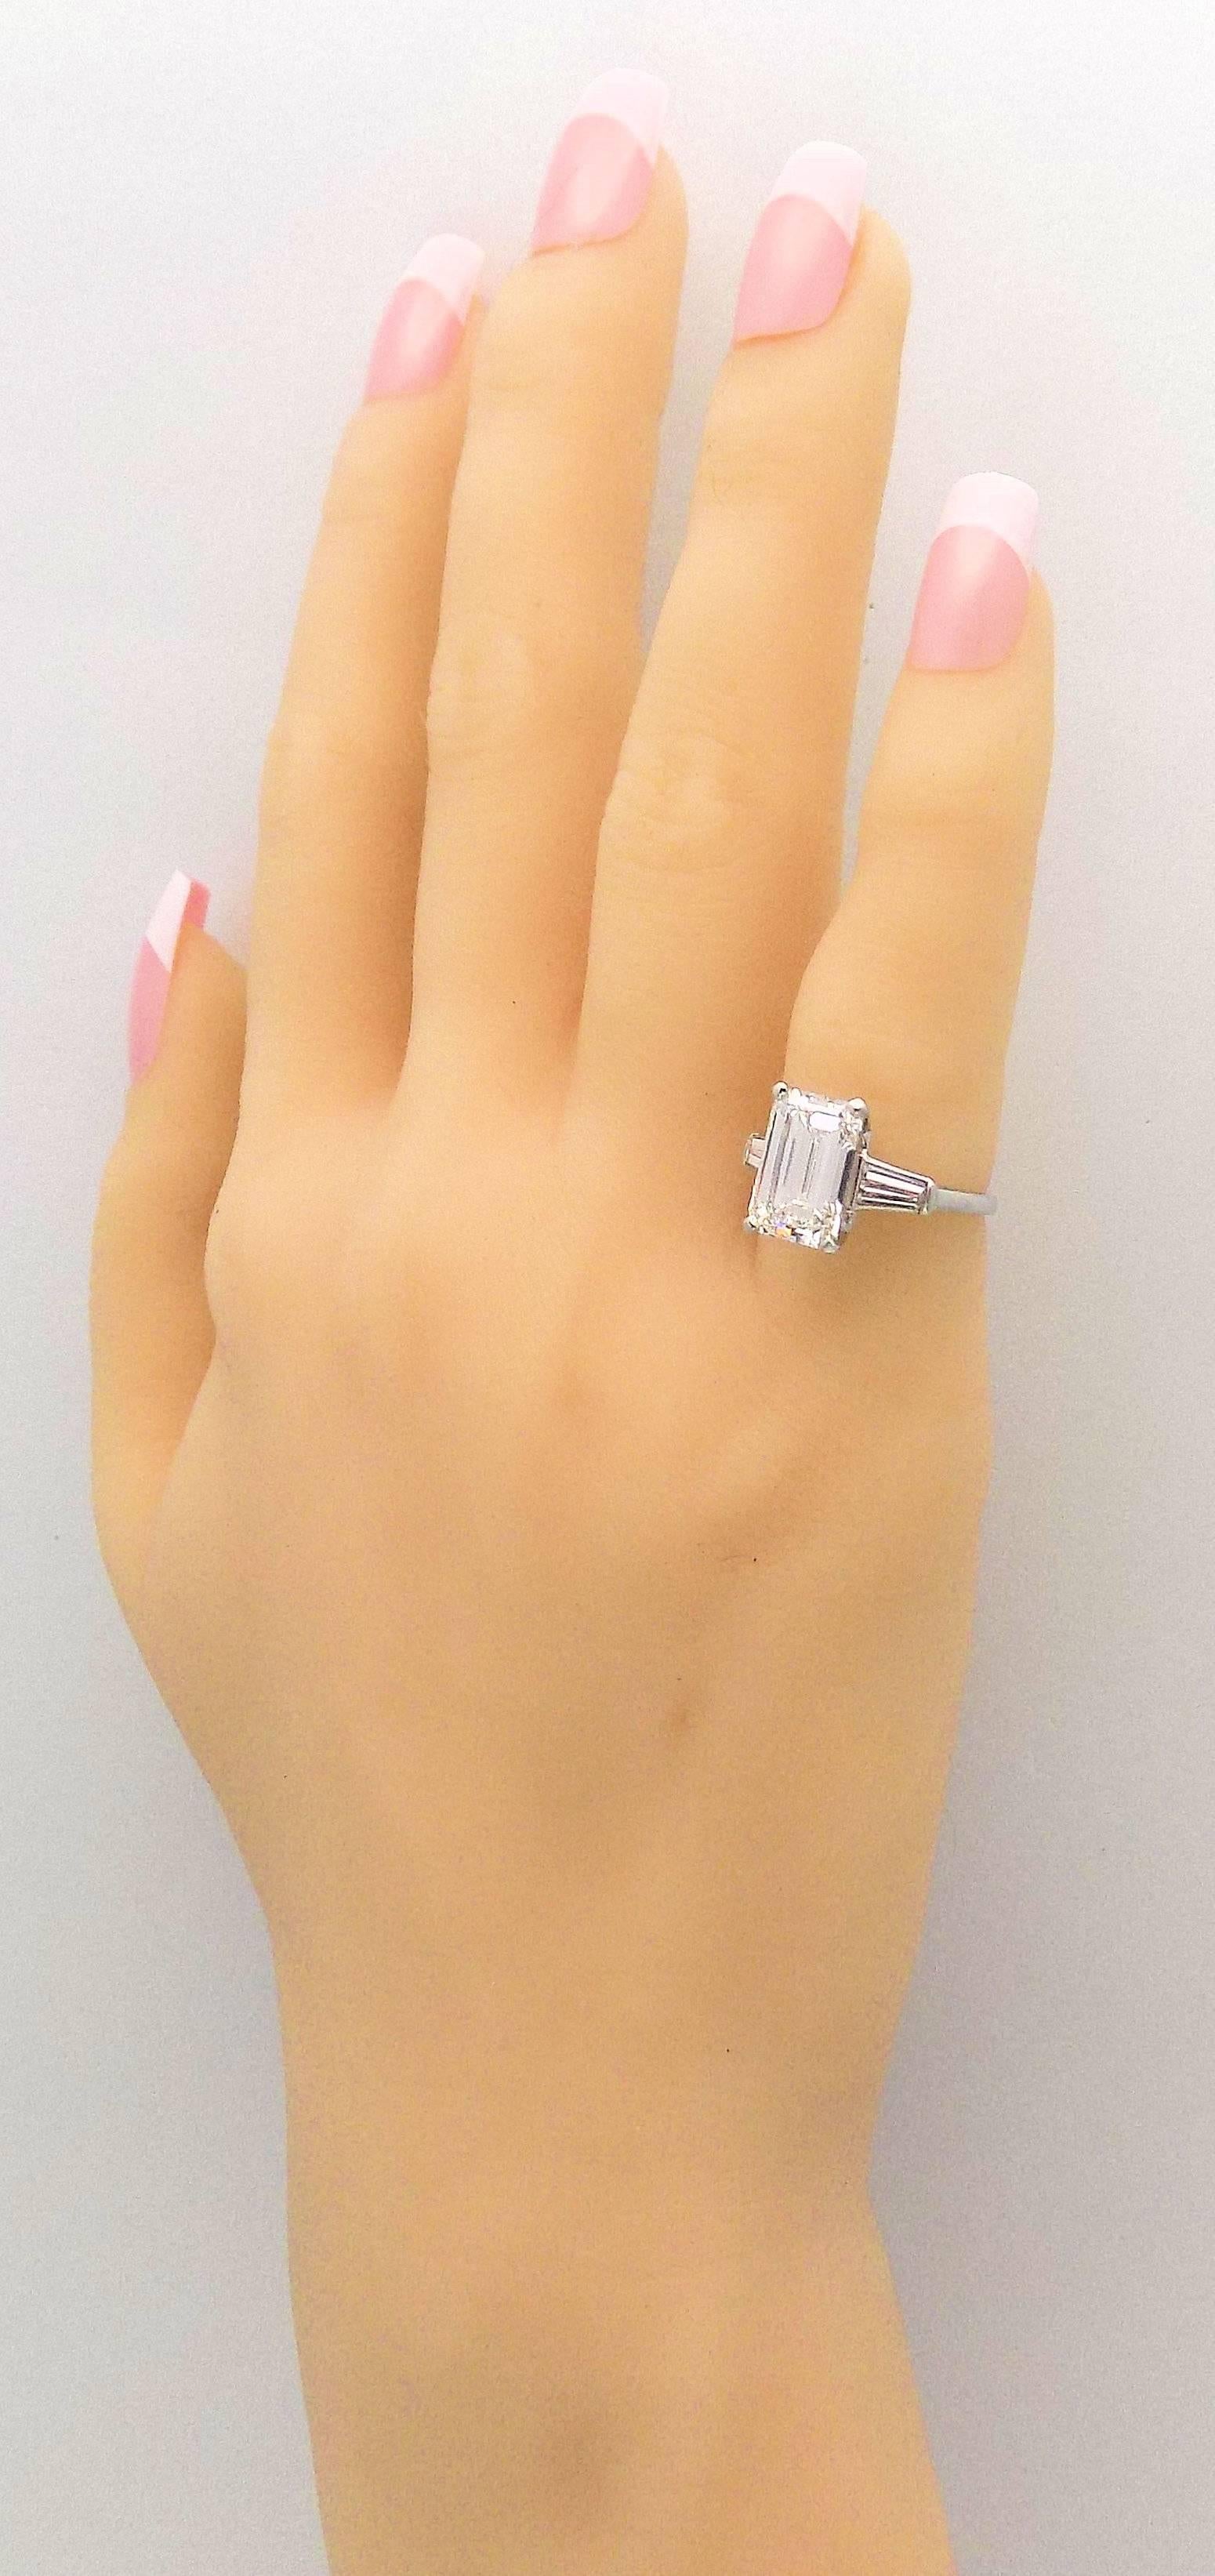 Classic 3.25 Carat Emerald Cut Diamond GIA Certified Engagement Ring For Sale 2